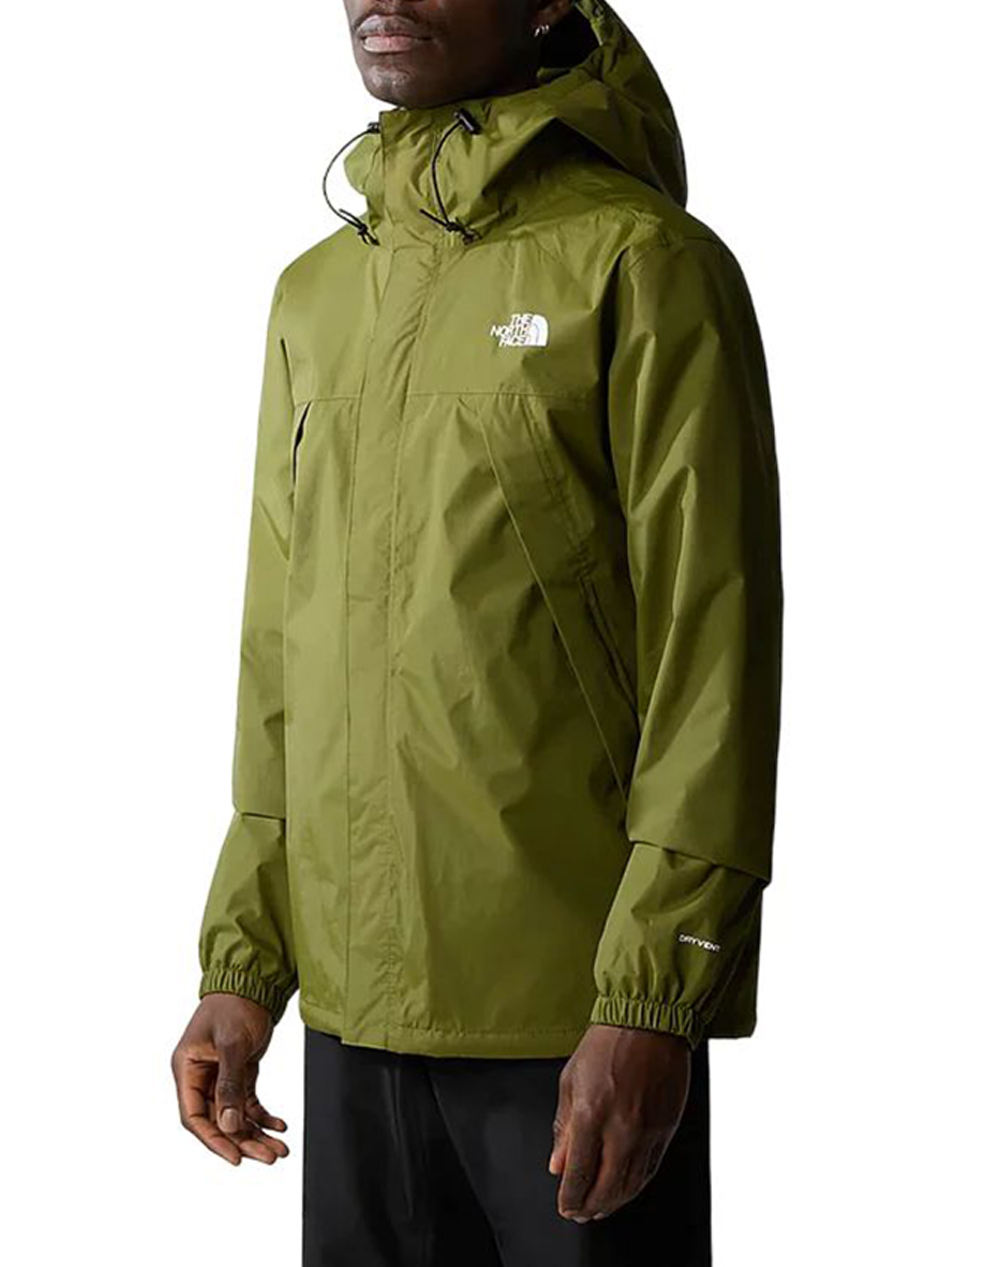 THE NORTH FACE M ANTORA JACKET NF0A7QEY-NFPIB Olive